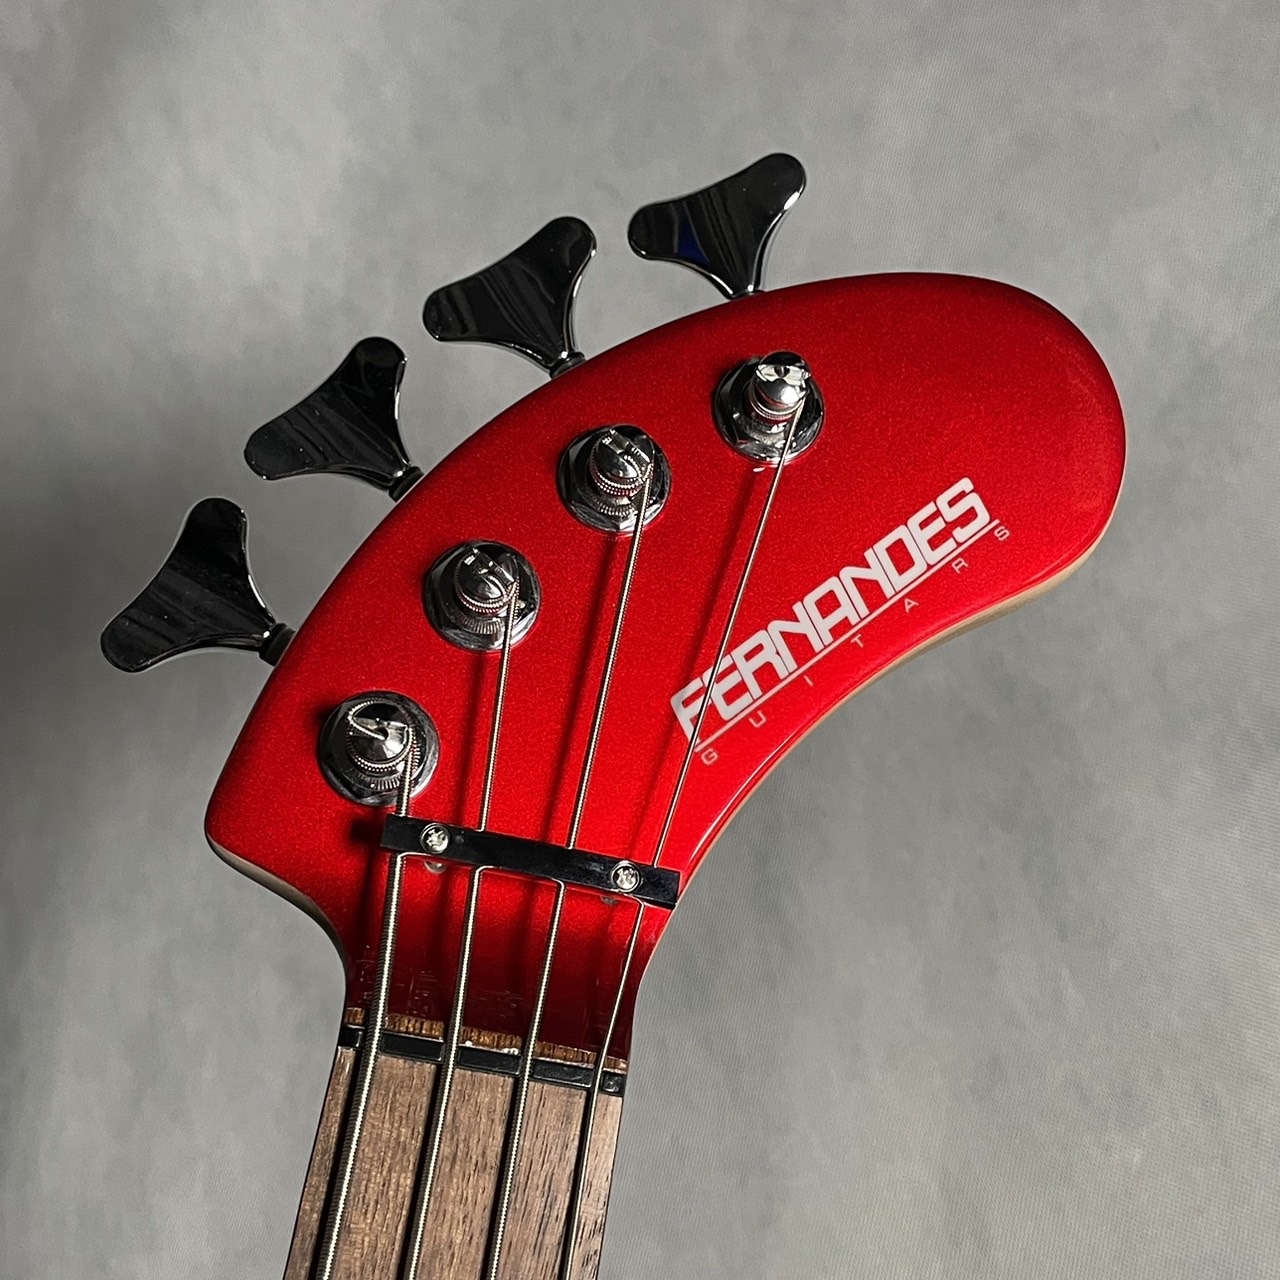 FERNANDES ZO-3 BASS Candy Apple Red【現物画像】3.45kg 